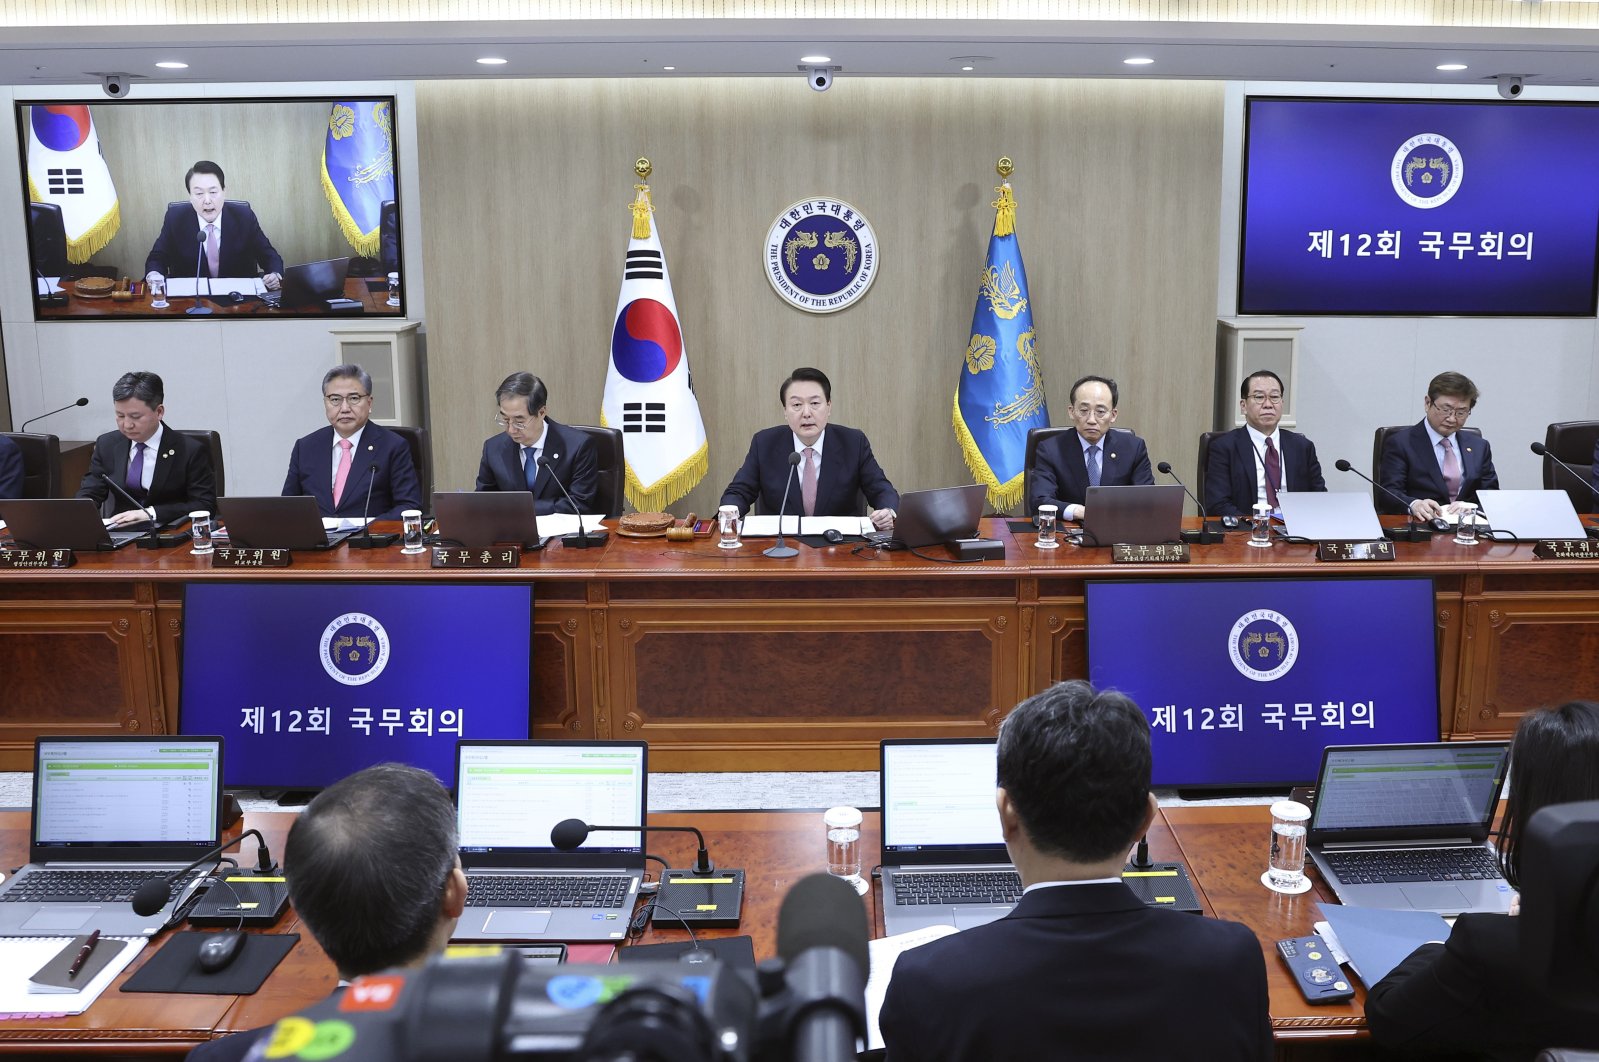 South Korean President Yoon Suk Yeol, top center, speaks during a Cabinet meeting at the president office in Seoul, South Korea, March 21, 2023. (AP Photo)